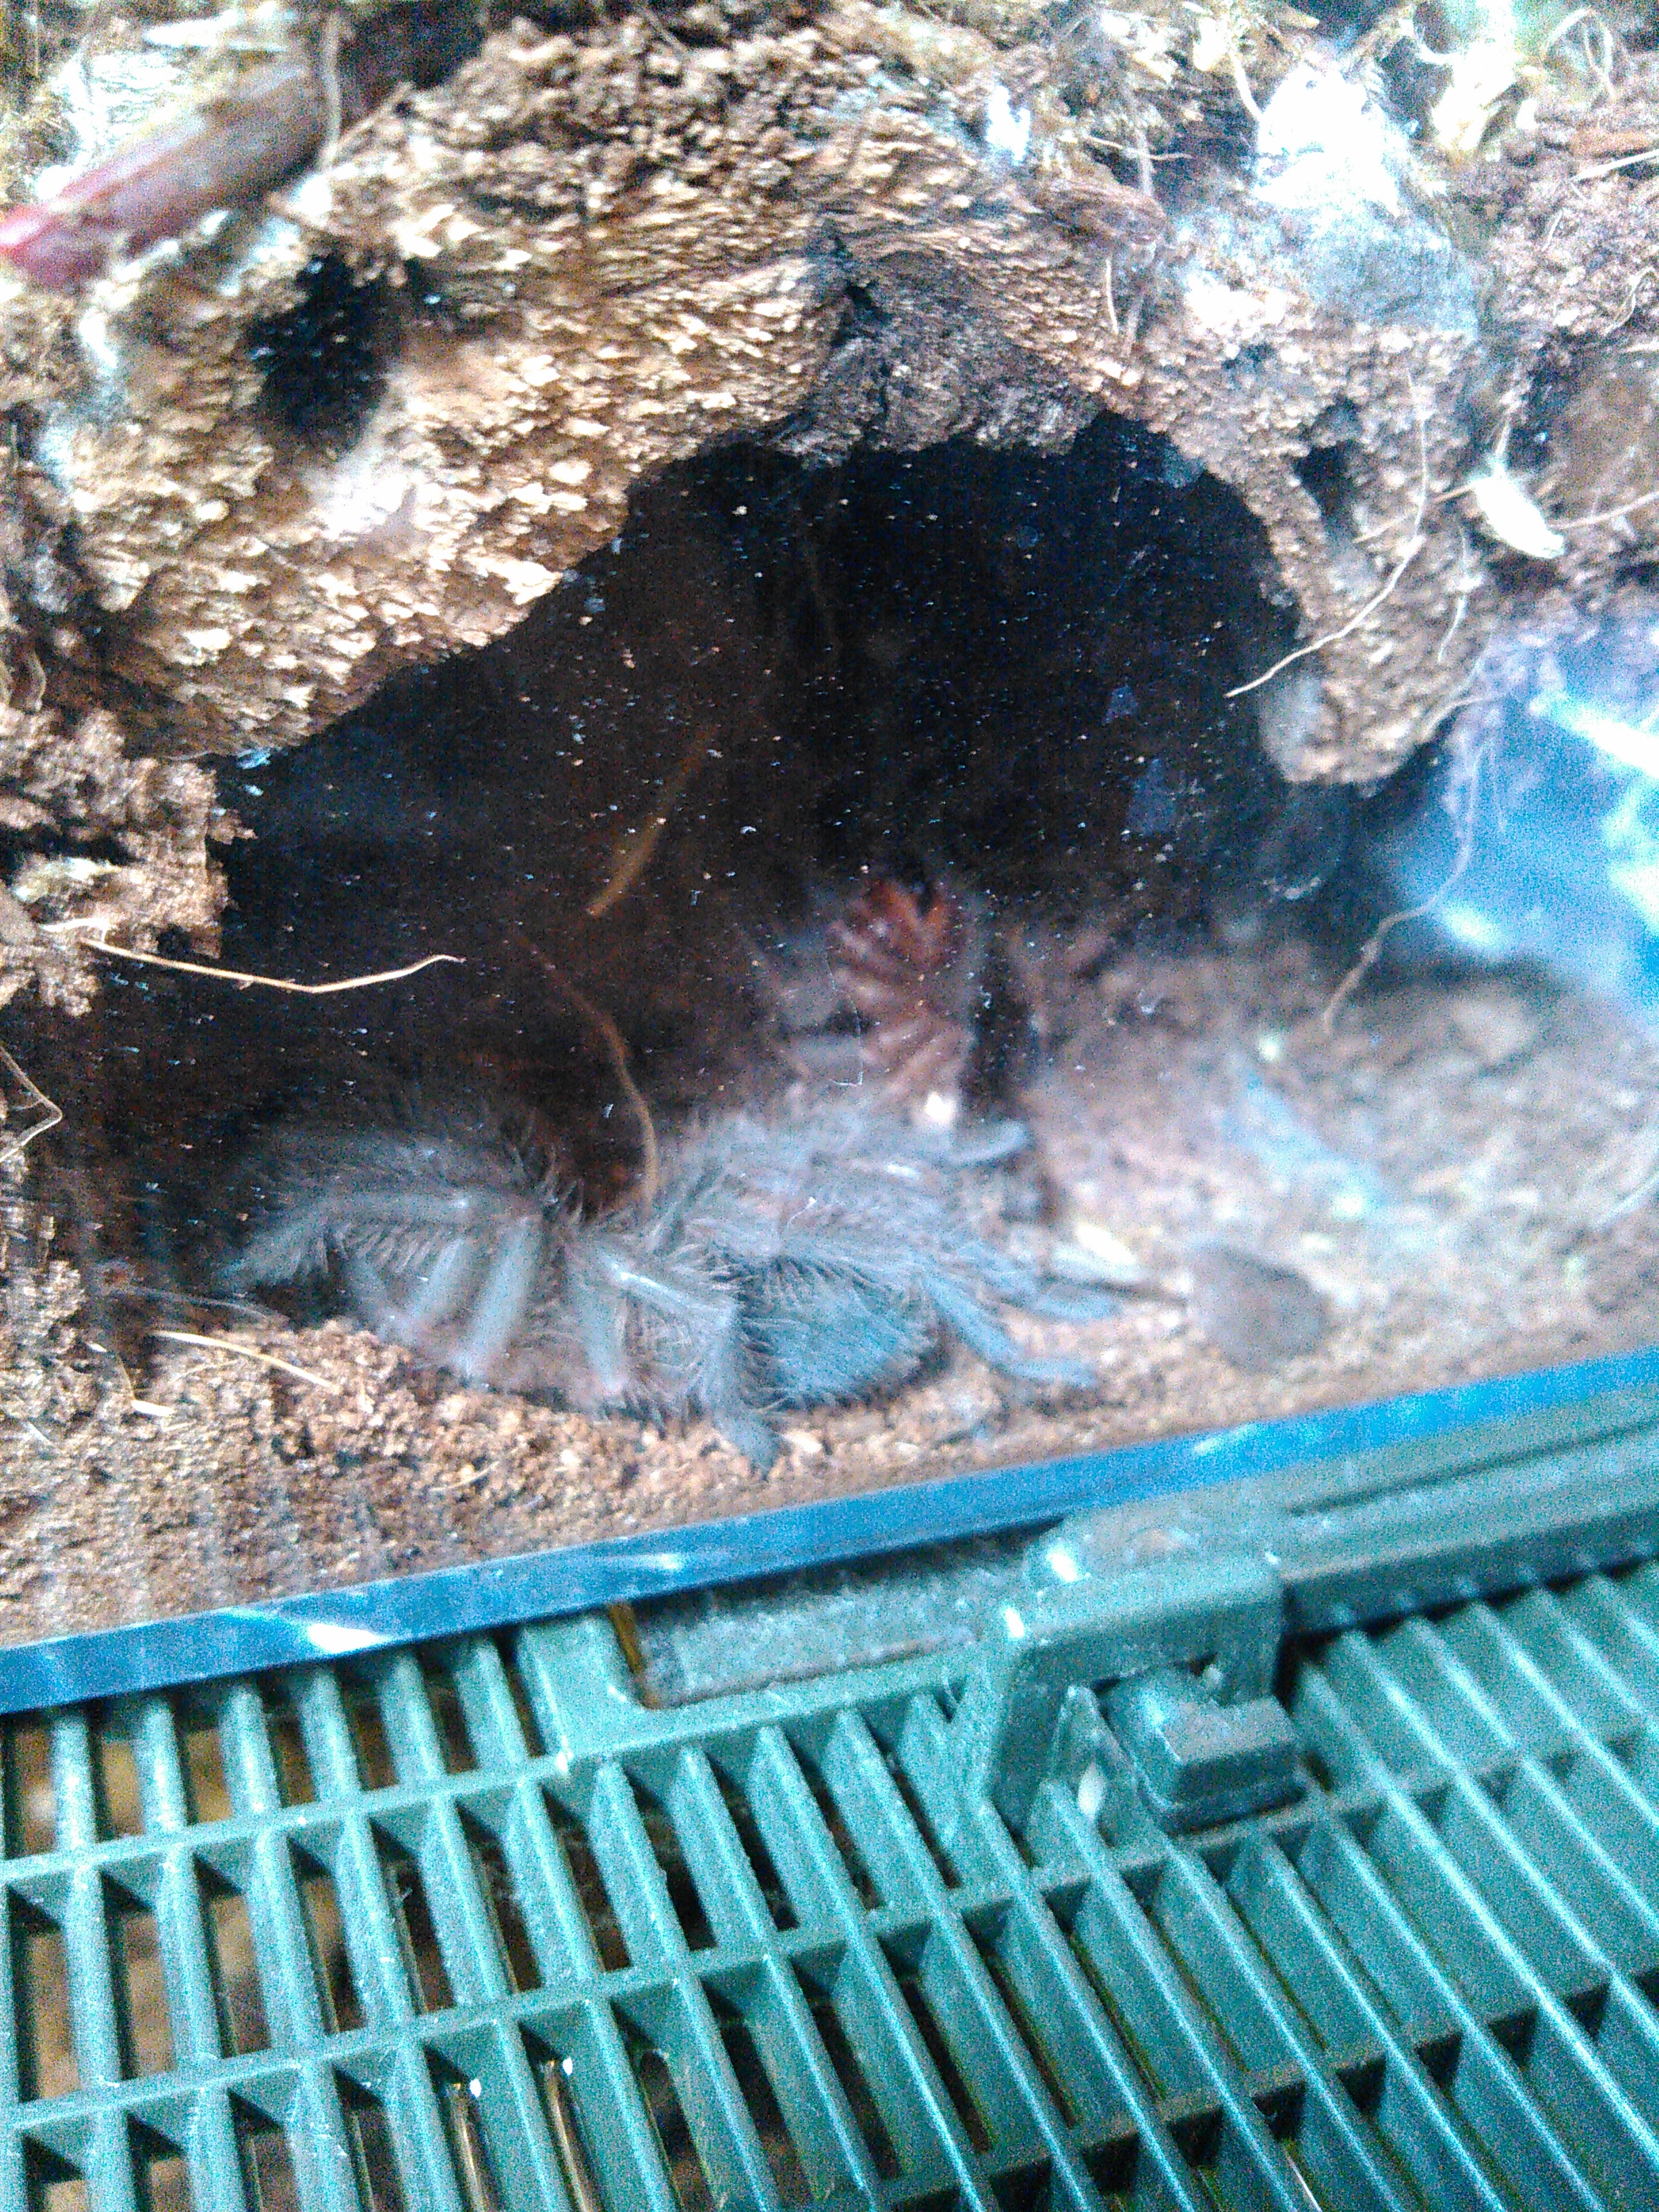 G.pulchra freshly molted